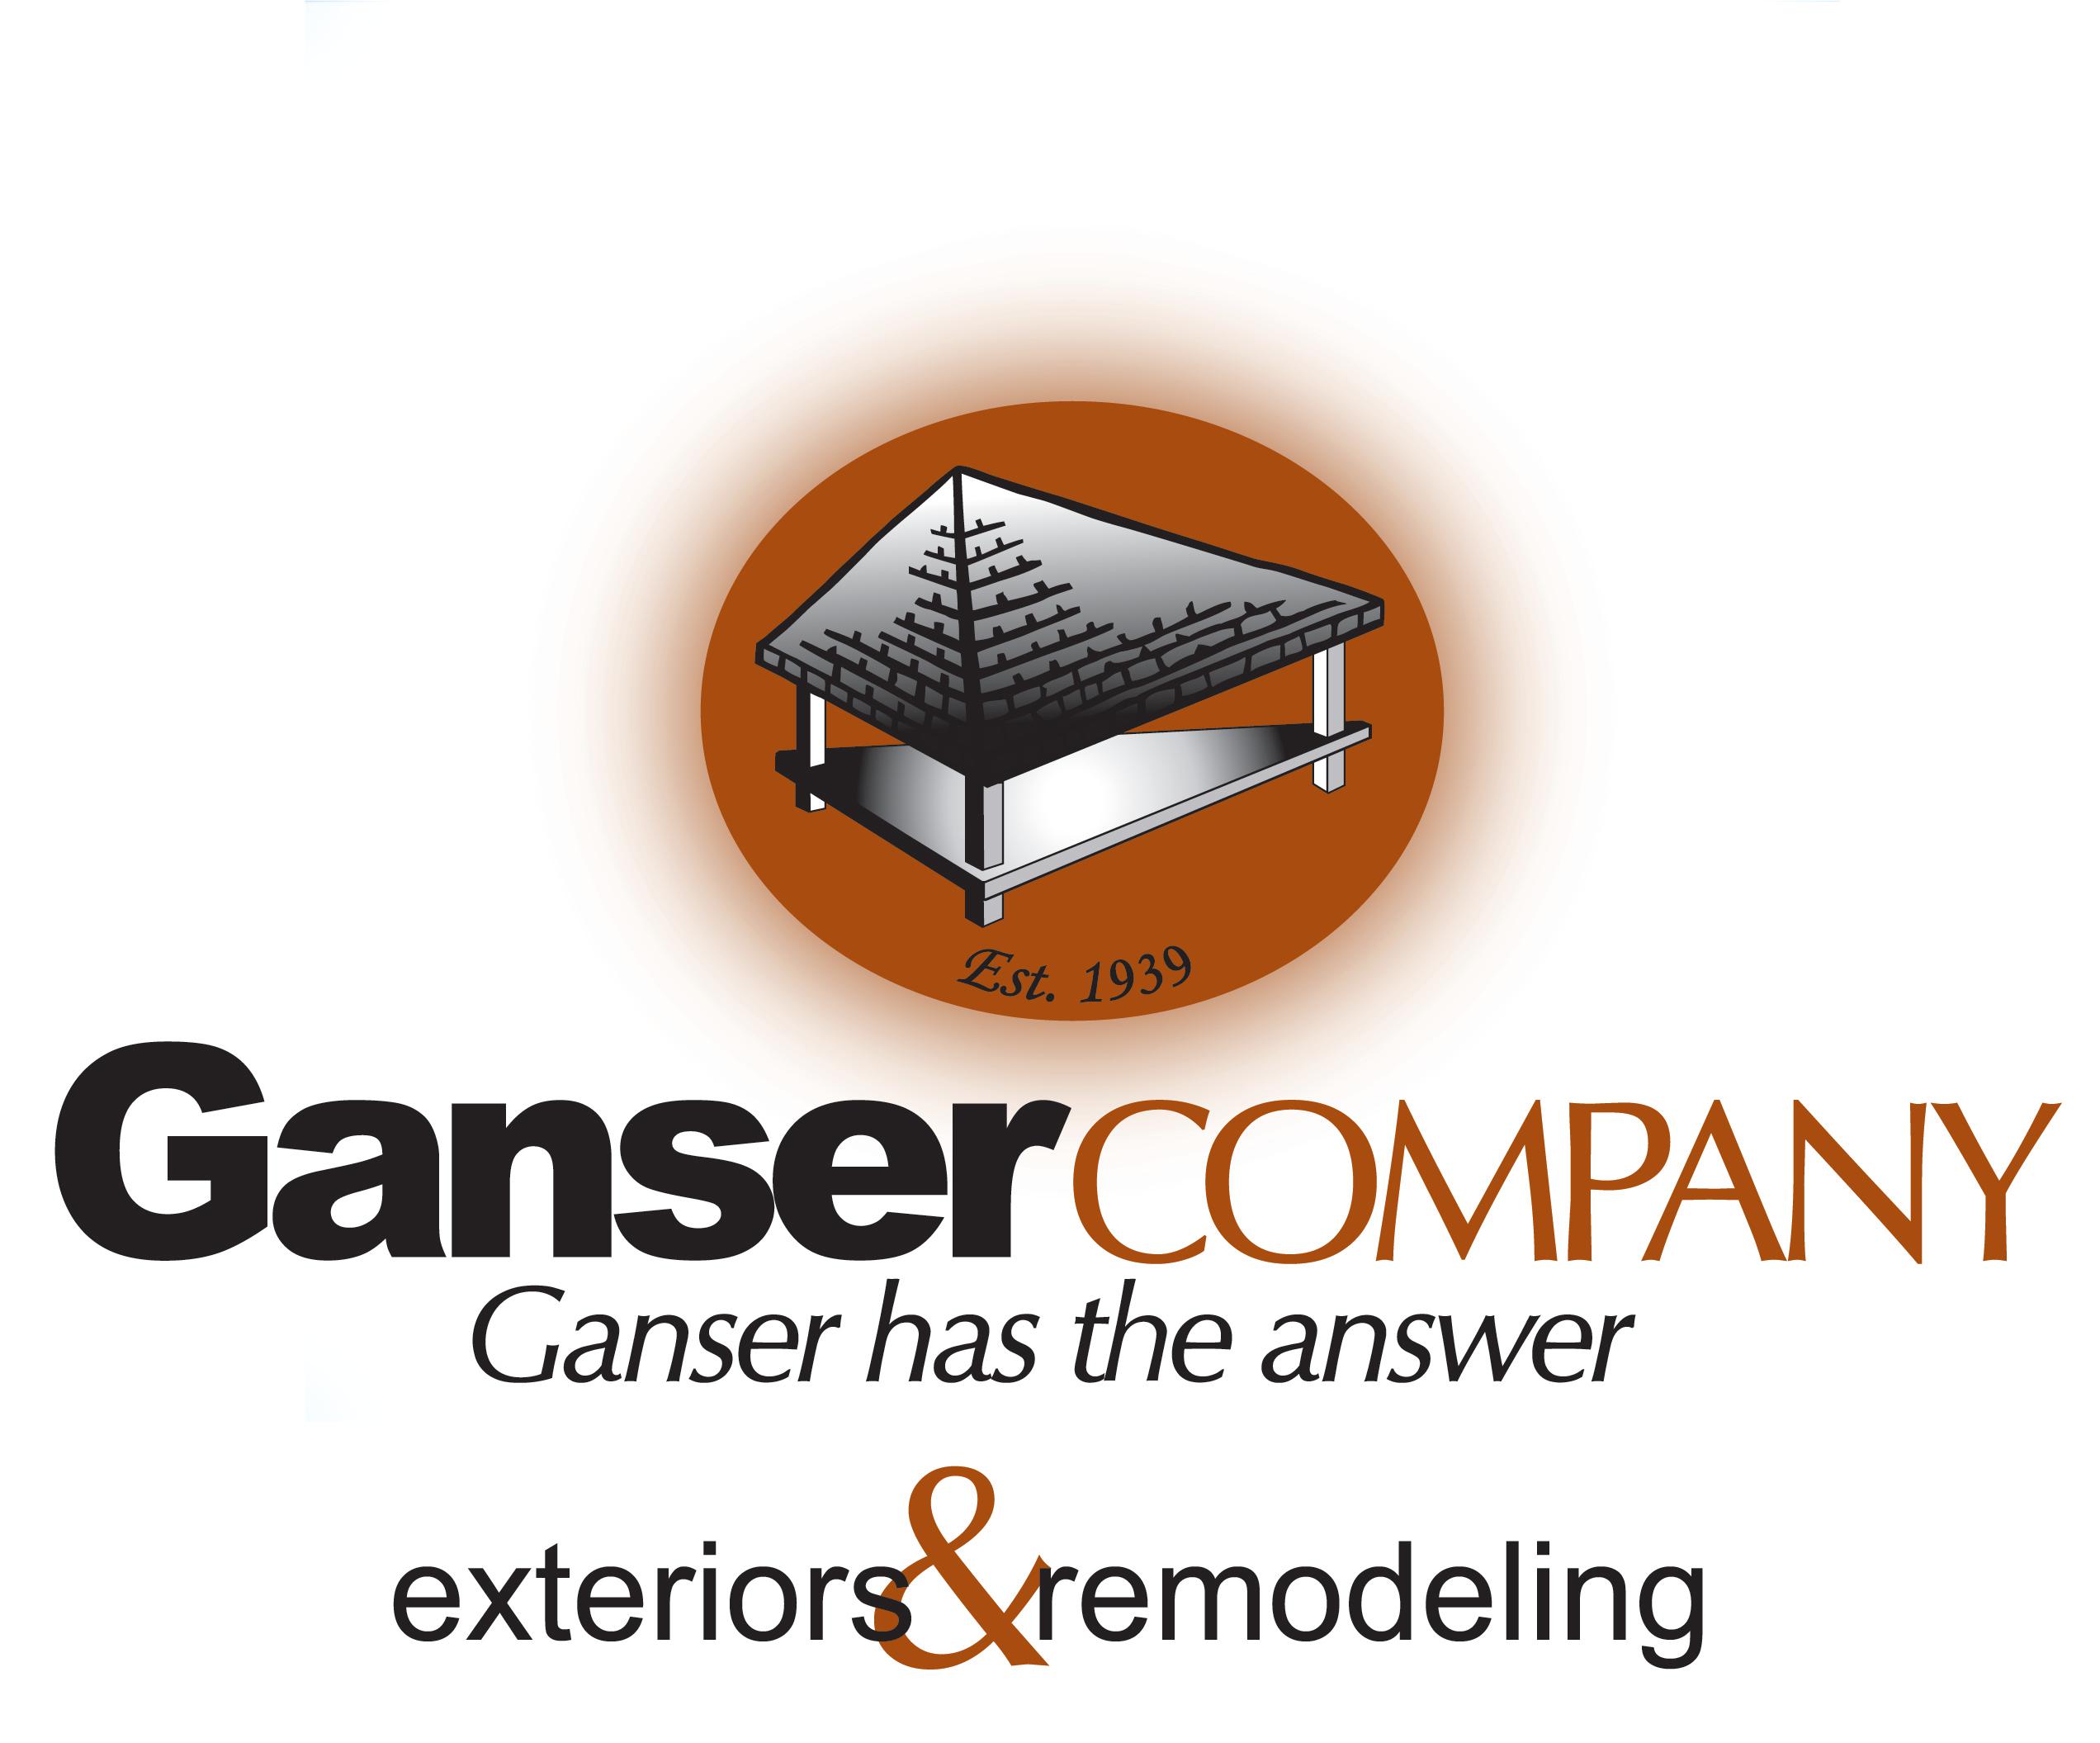 Ganser Company, Inc. has been around since 1939, so we've been around the Madison area for 85 years. We currently have our 4th & 5th generations working at our company.